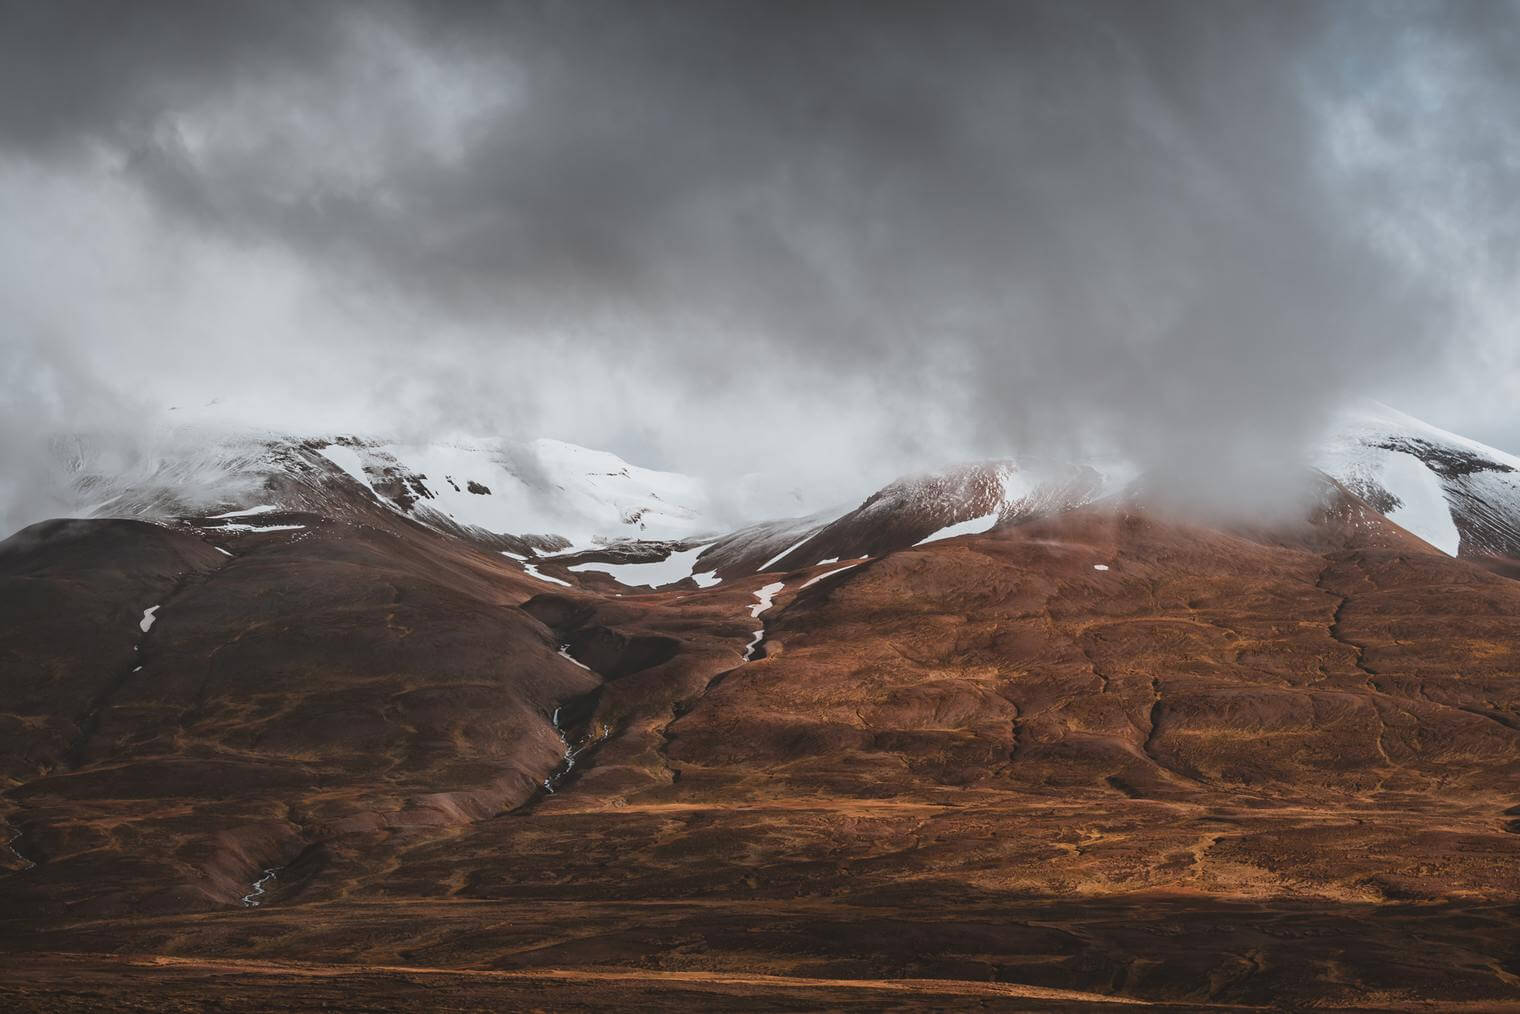 Moody Earth Tones - Edited with Signature Lightroom Presets for Landscape Photography